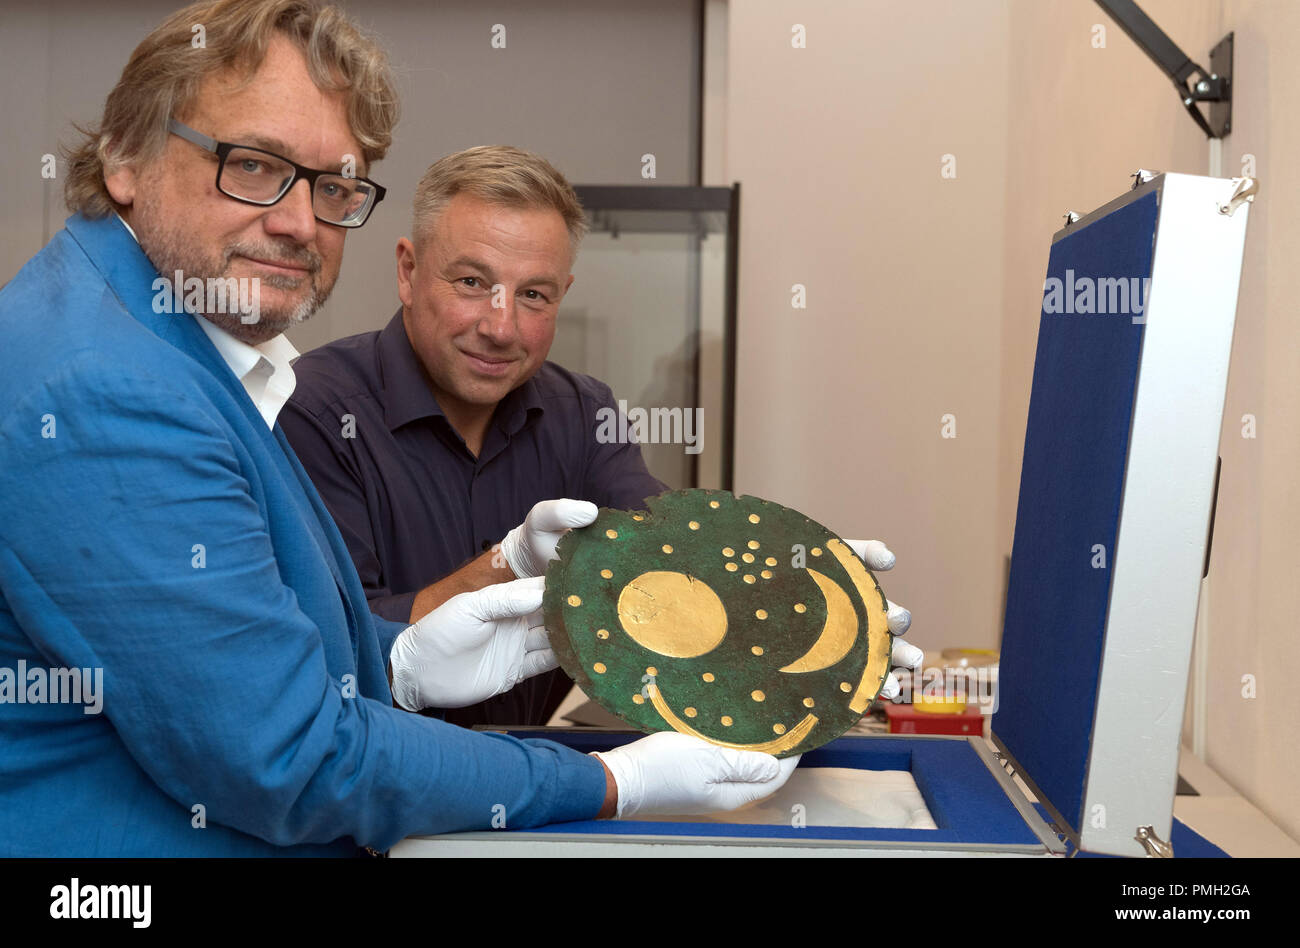 18 September 2018, Berlin: Harald Meller (l), Director of the State Office for the Preservation of Monuments and Archaeology in Saxony-Anhalt, and Matthias Wemhoff, Director of the Berlin Museum for Prehistory and Early History of the National Museums have taken the Nebra Sky Disc from a special transport box in the Martin-Gropius-Bau. The Bronze Age disc will be on display from 21.09.2018 together with about 1000 archaeological finds in the exhibition 'Moving Times. Archaeology in Germany'. Photo: Soeren Stache/dpa Stock Photo